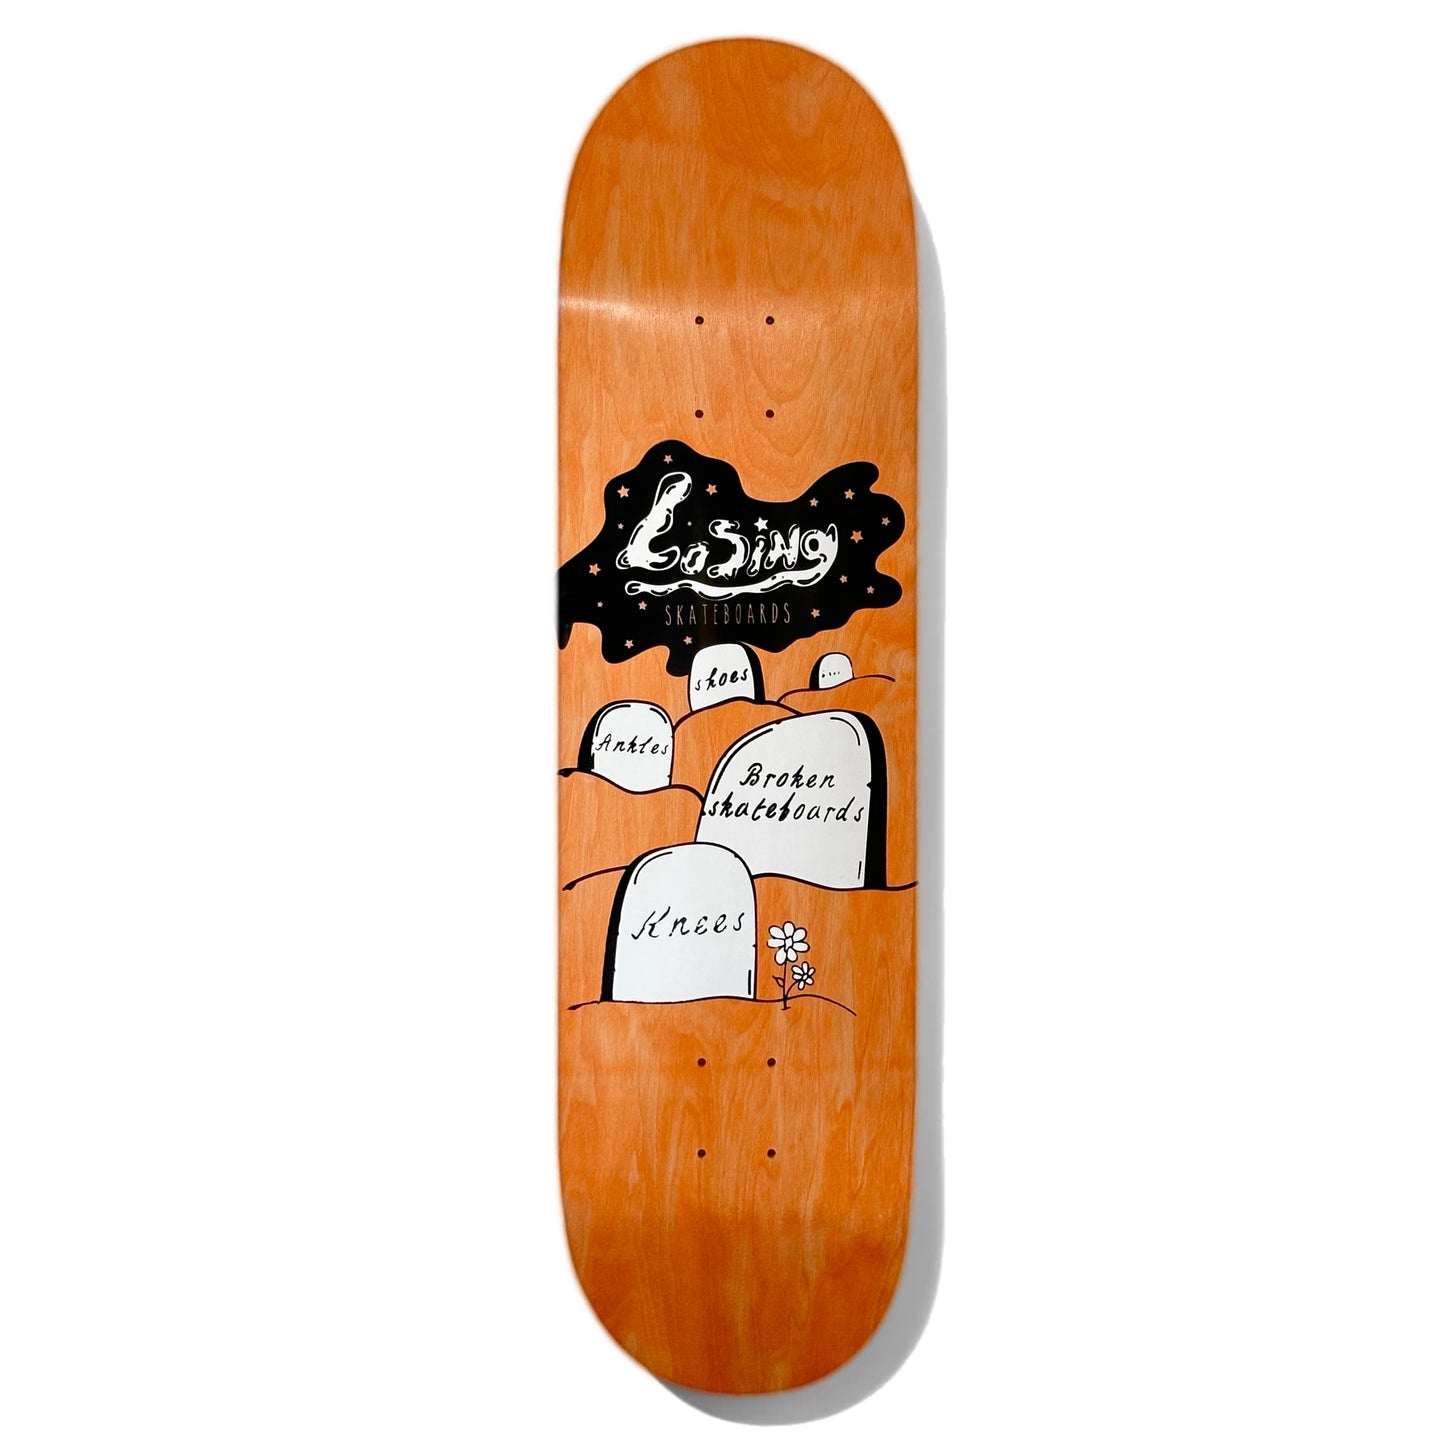 Losing Graveyard Skateboard Deck; Orange background; Illustrated black and white graphic features graveyard with headstones that read “Knees,” “Broken Skateboards,” “Ankles,” and “Shoes”; White Lettering spells out “Losing Skateboards” across night sky in back of graveyard